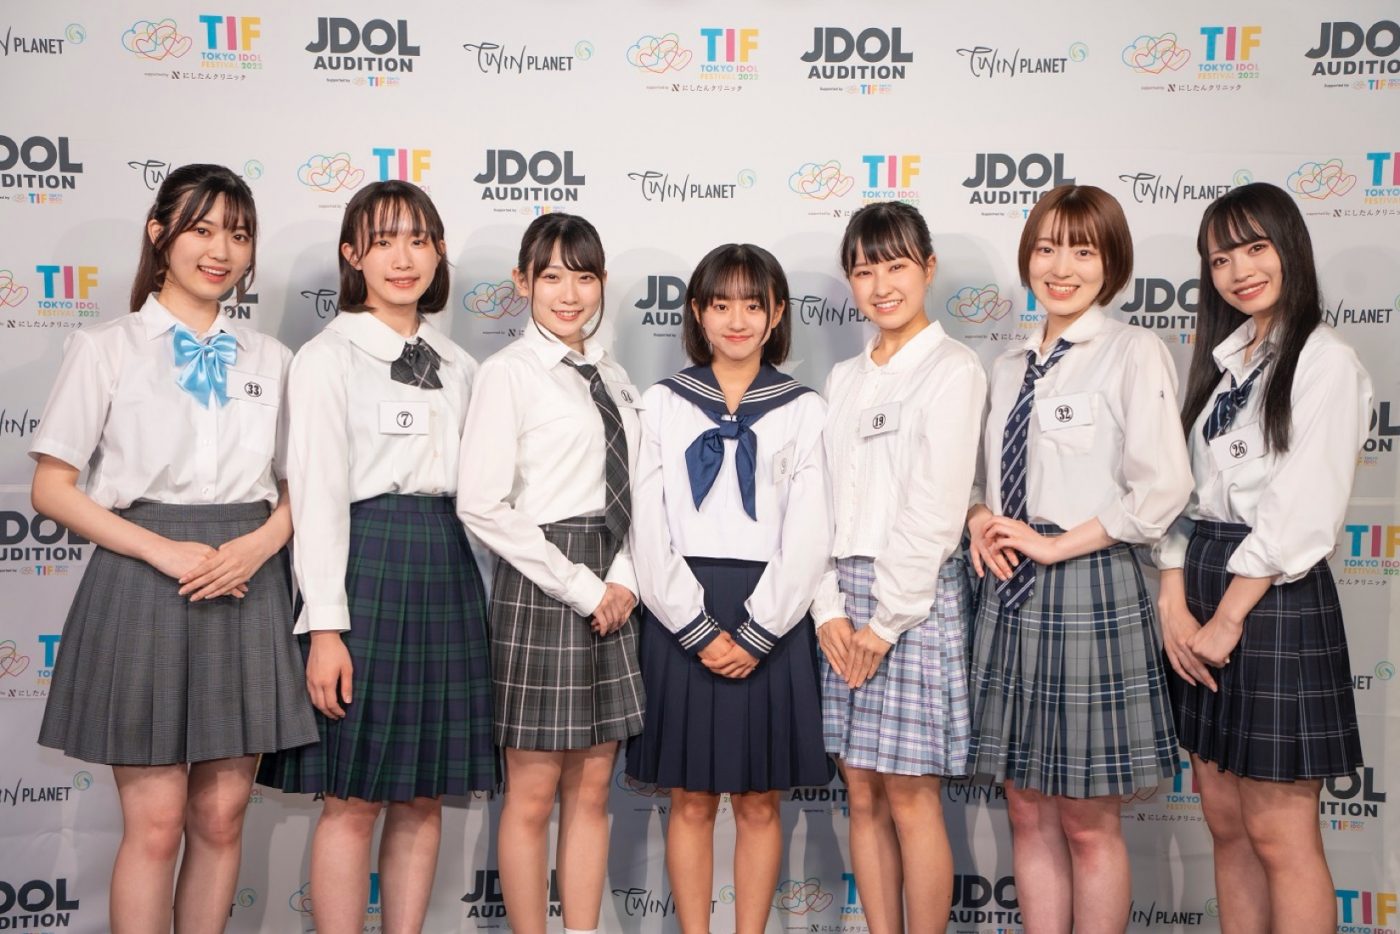 『JDOL AUDITION supported by TIF』最終審査合格者が7名が決定！『TIF』のステージでお披露目 - 画像一覧（3/3）